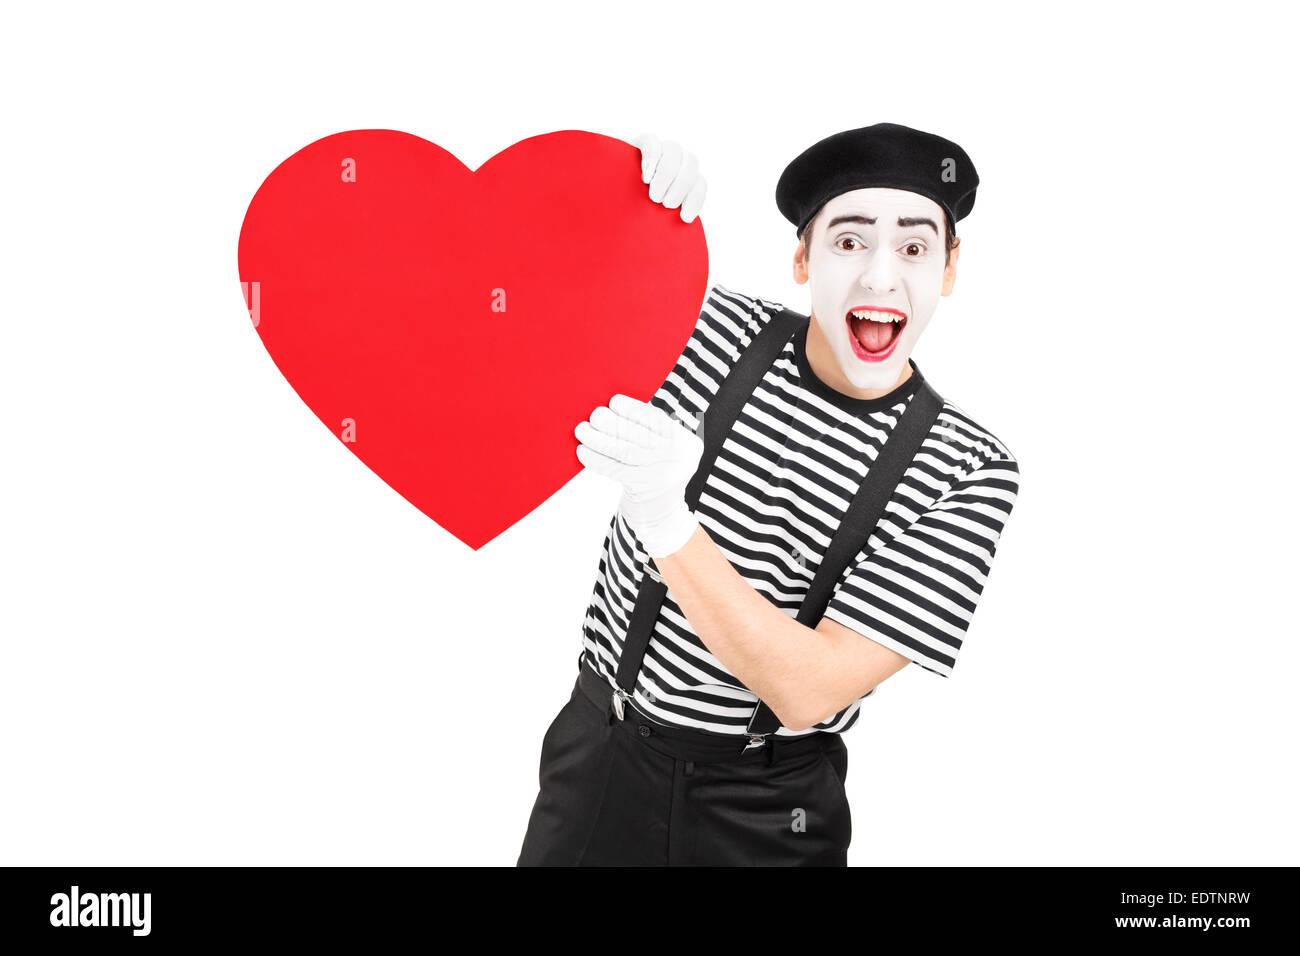 Mime artist holding a big red heart isolated on white background Stock Photo